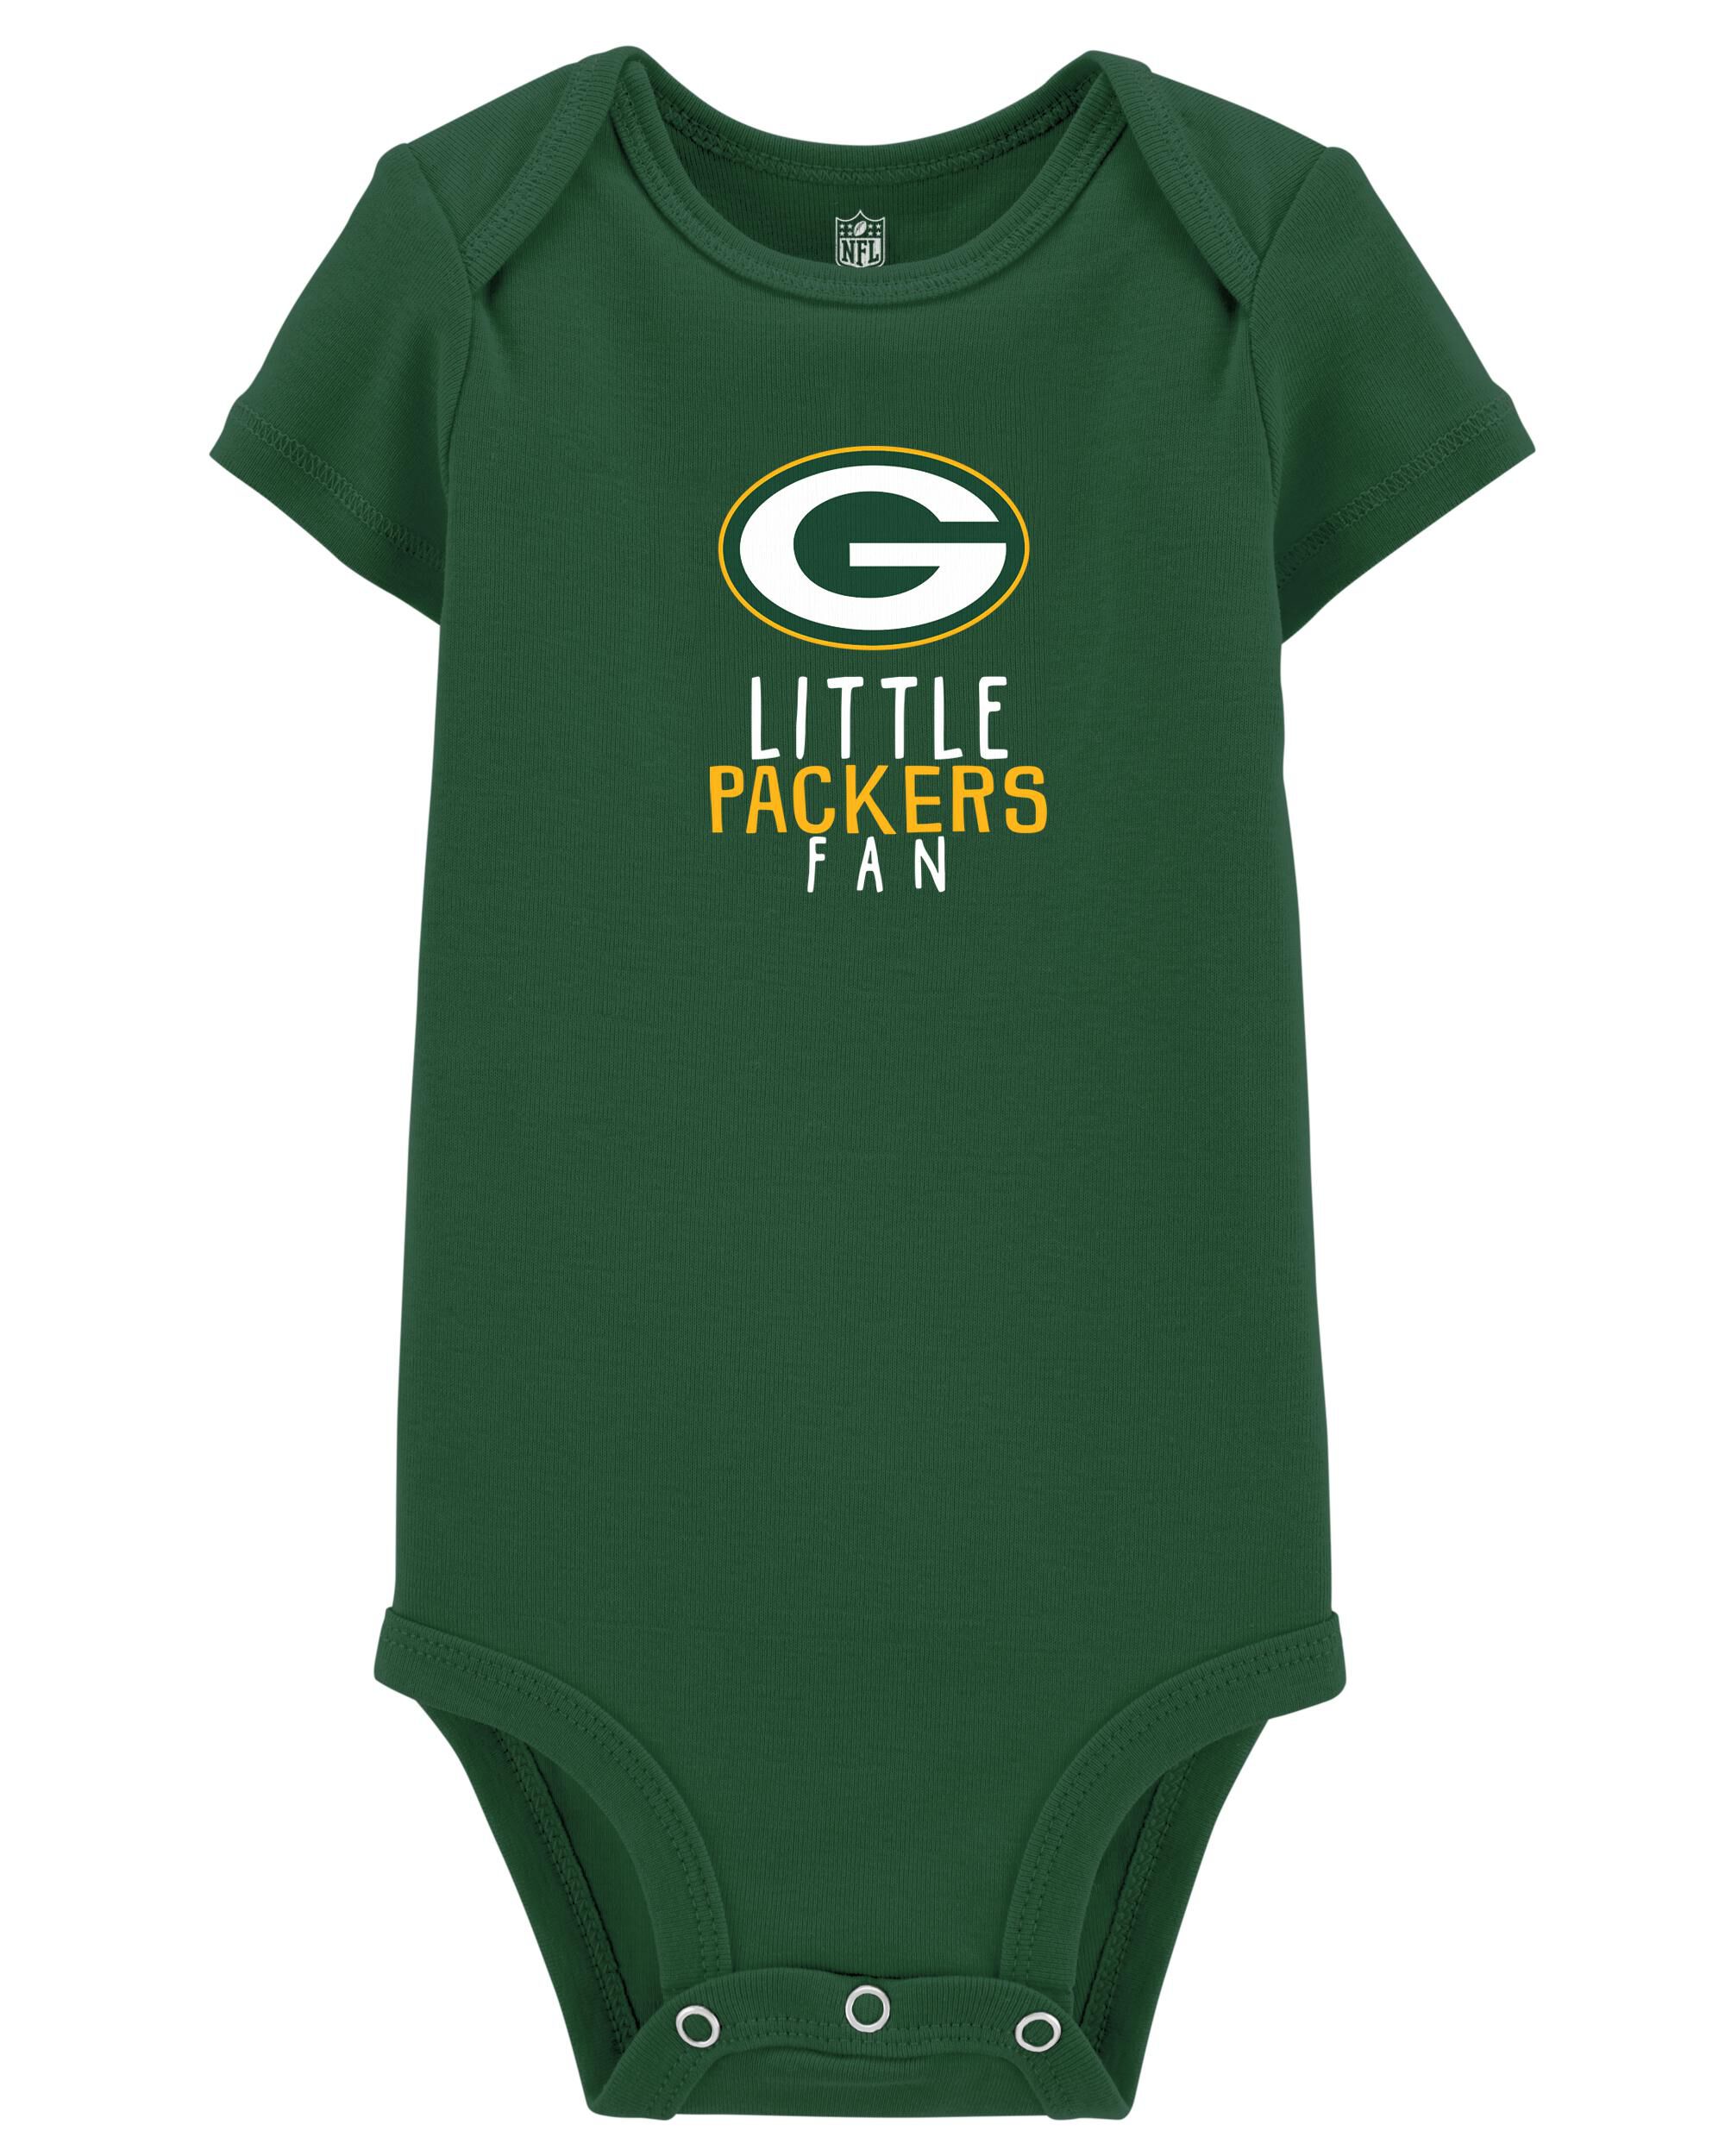 cute packers shirts